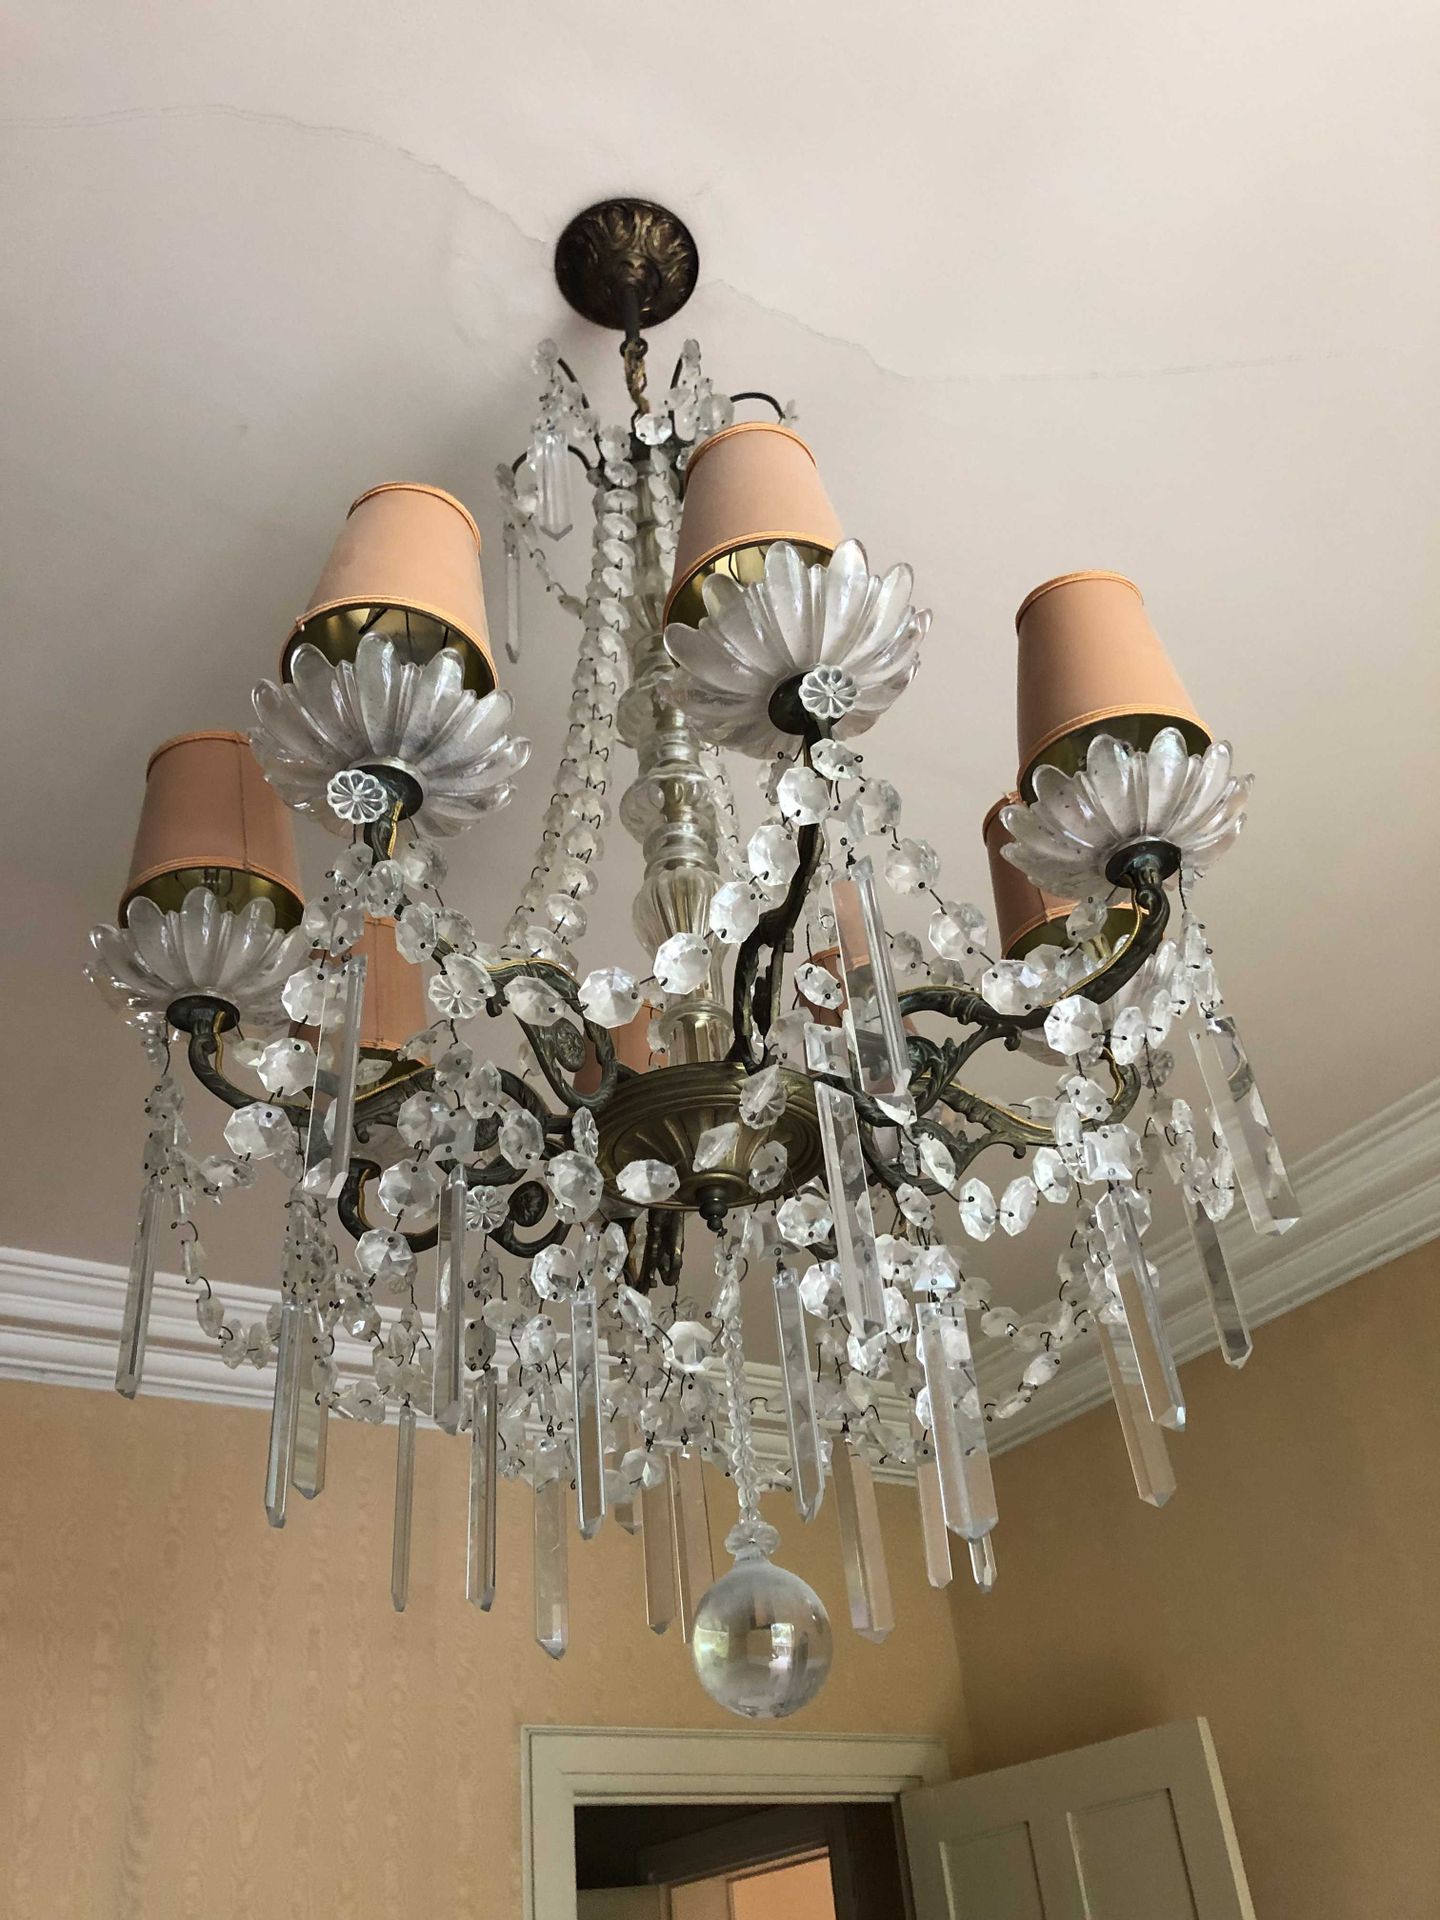 Null A bronze chandelier with 8 arms of light, decorated with cut crystal pendan&hellip;